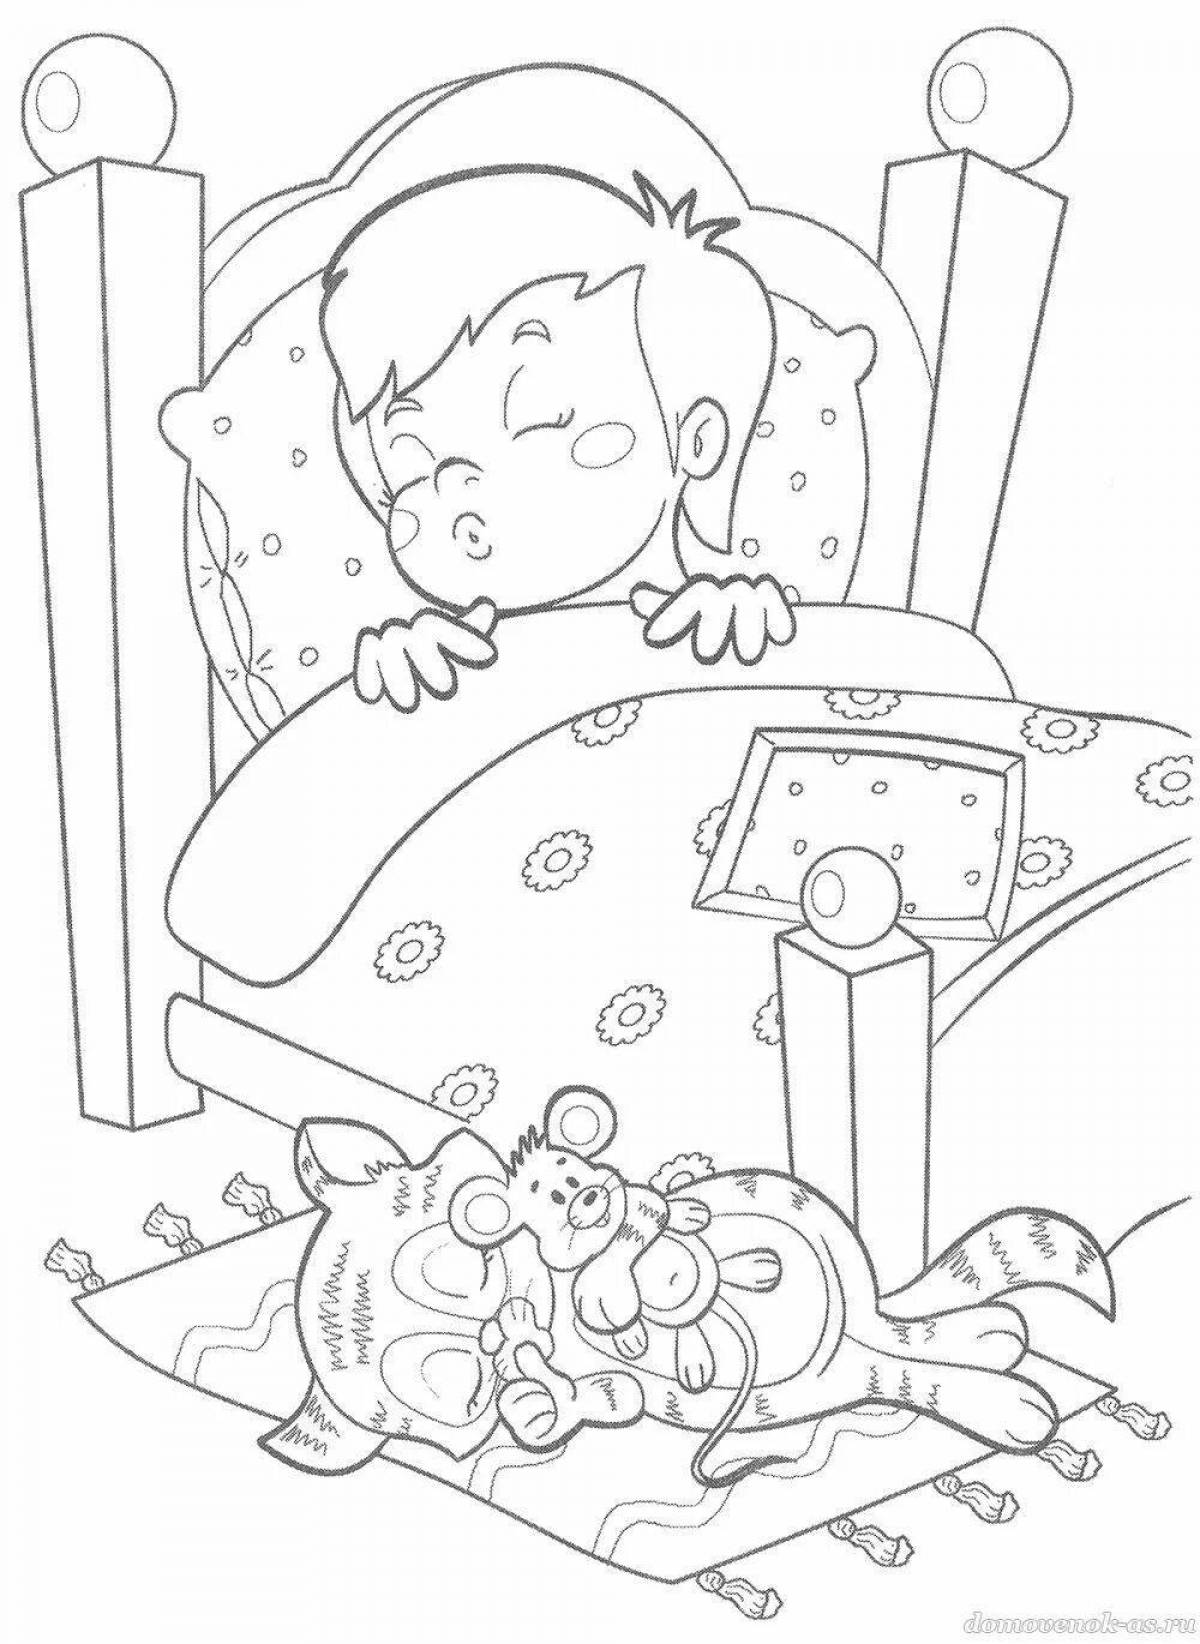 Mystic children sleeping coloring page